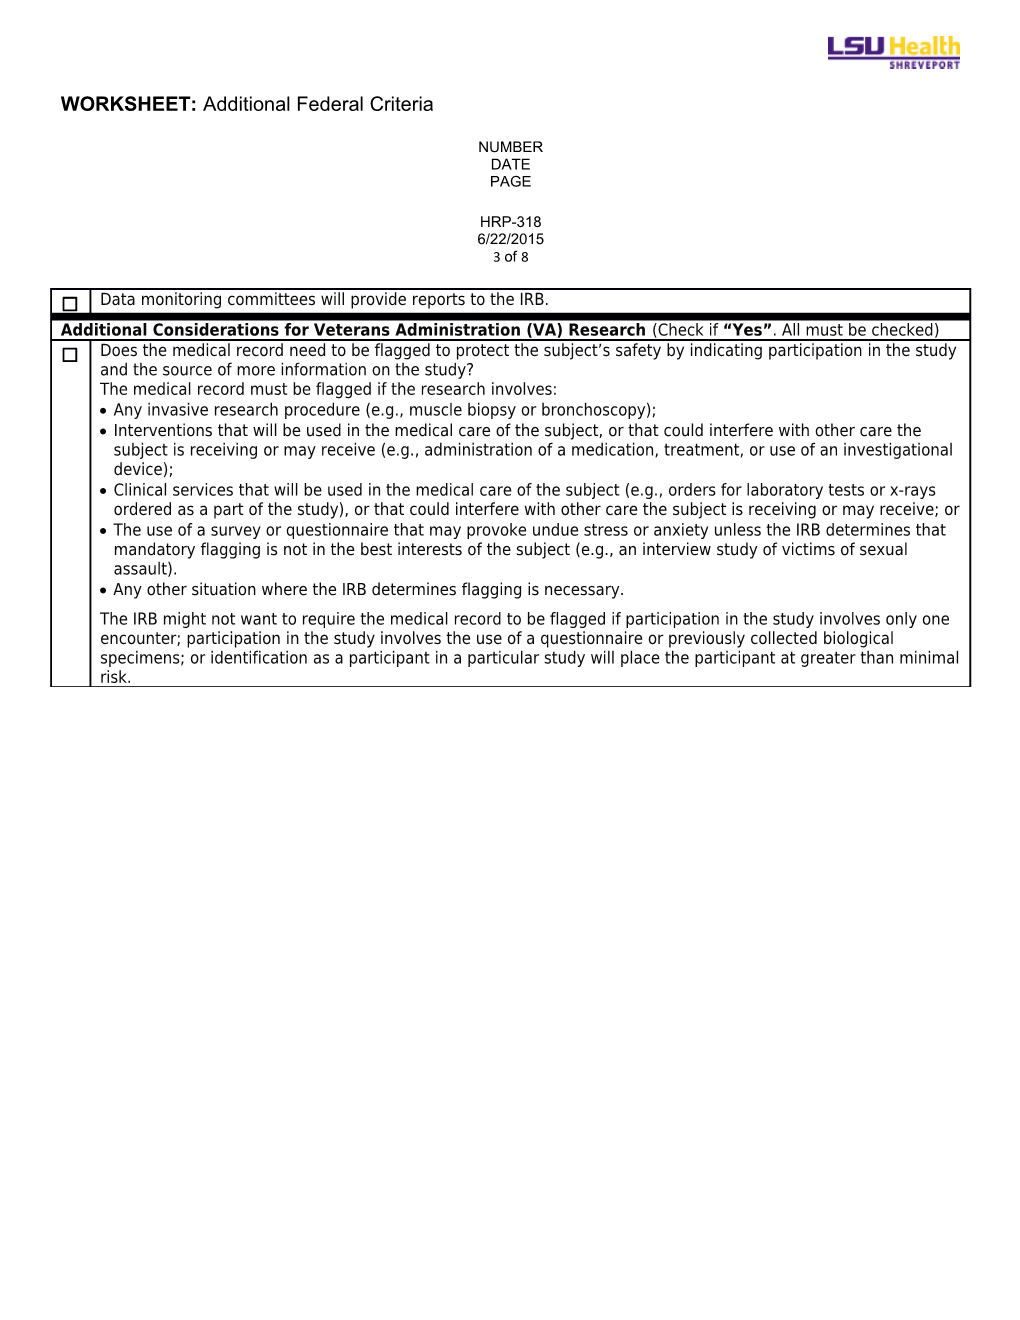 WORKSHEET: Criteria for Approval and Additional Considerations s1